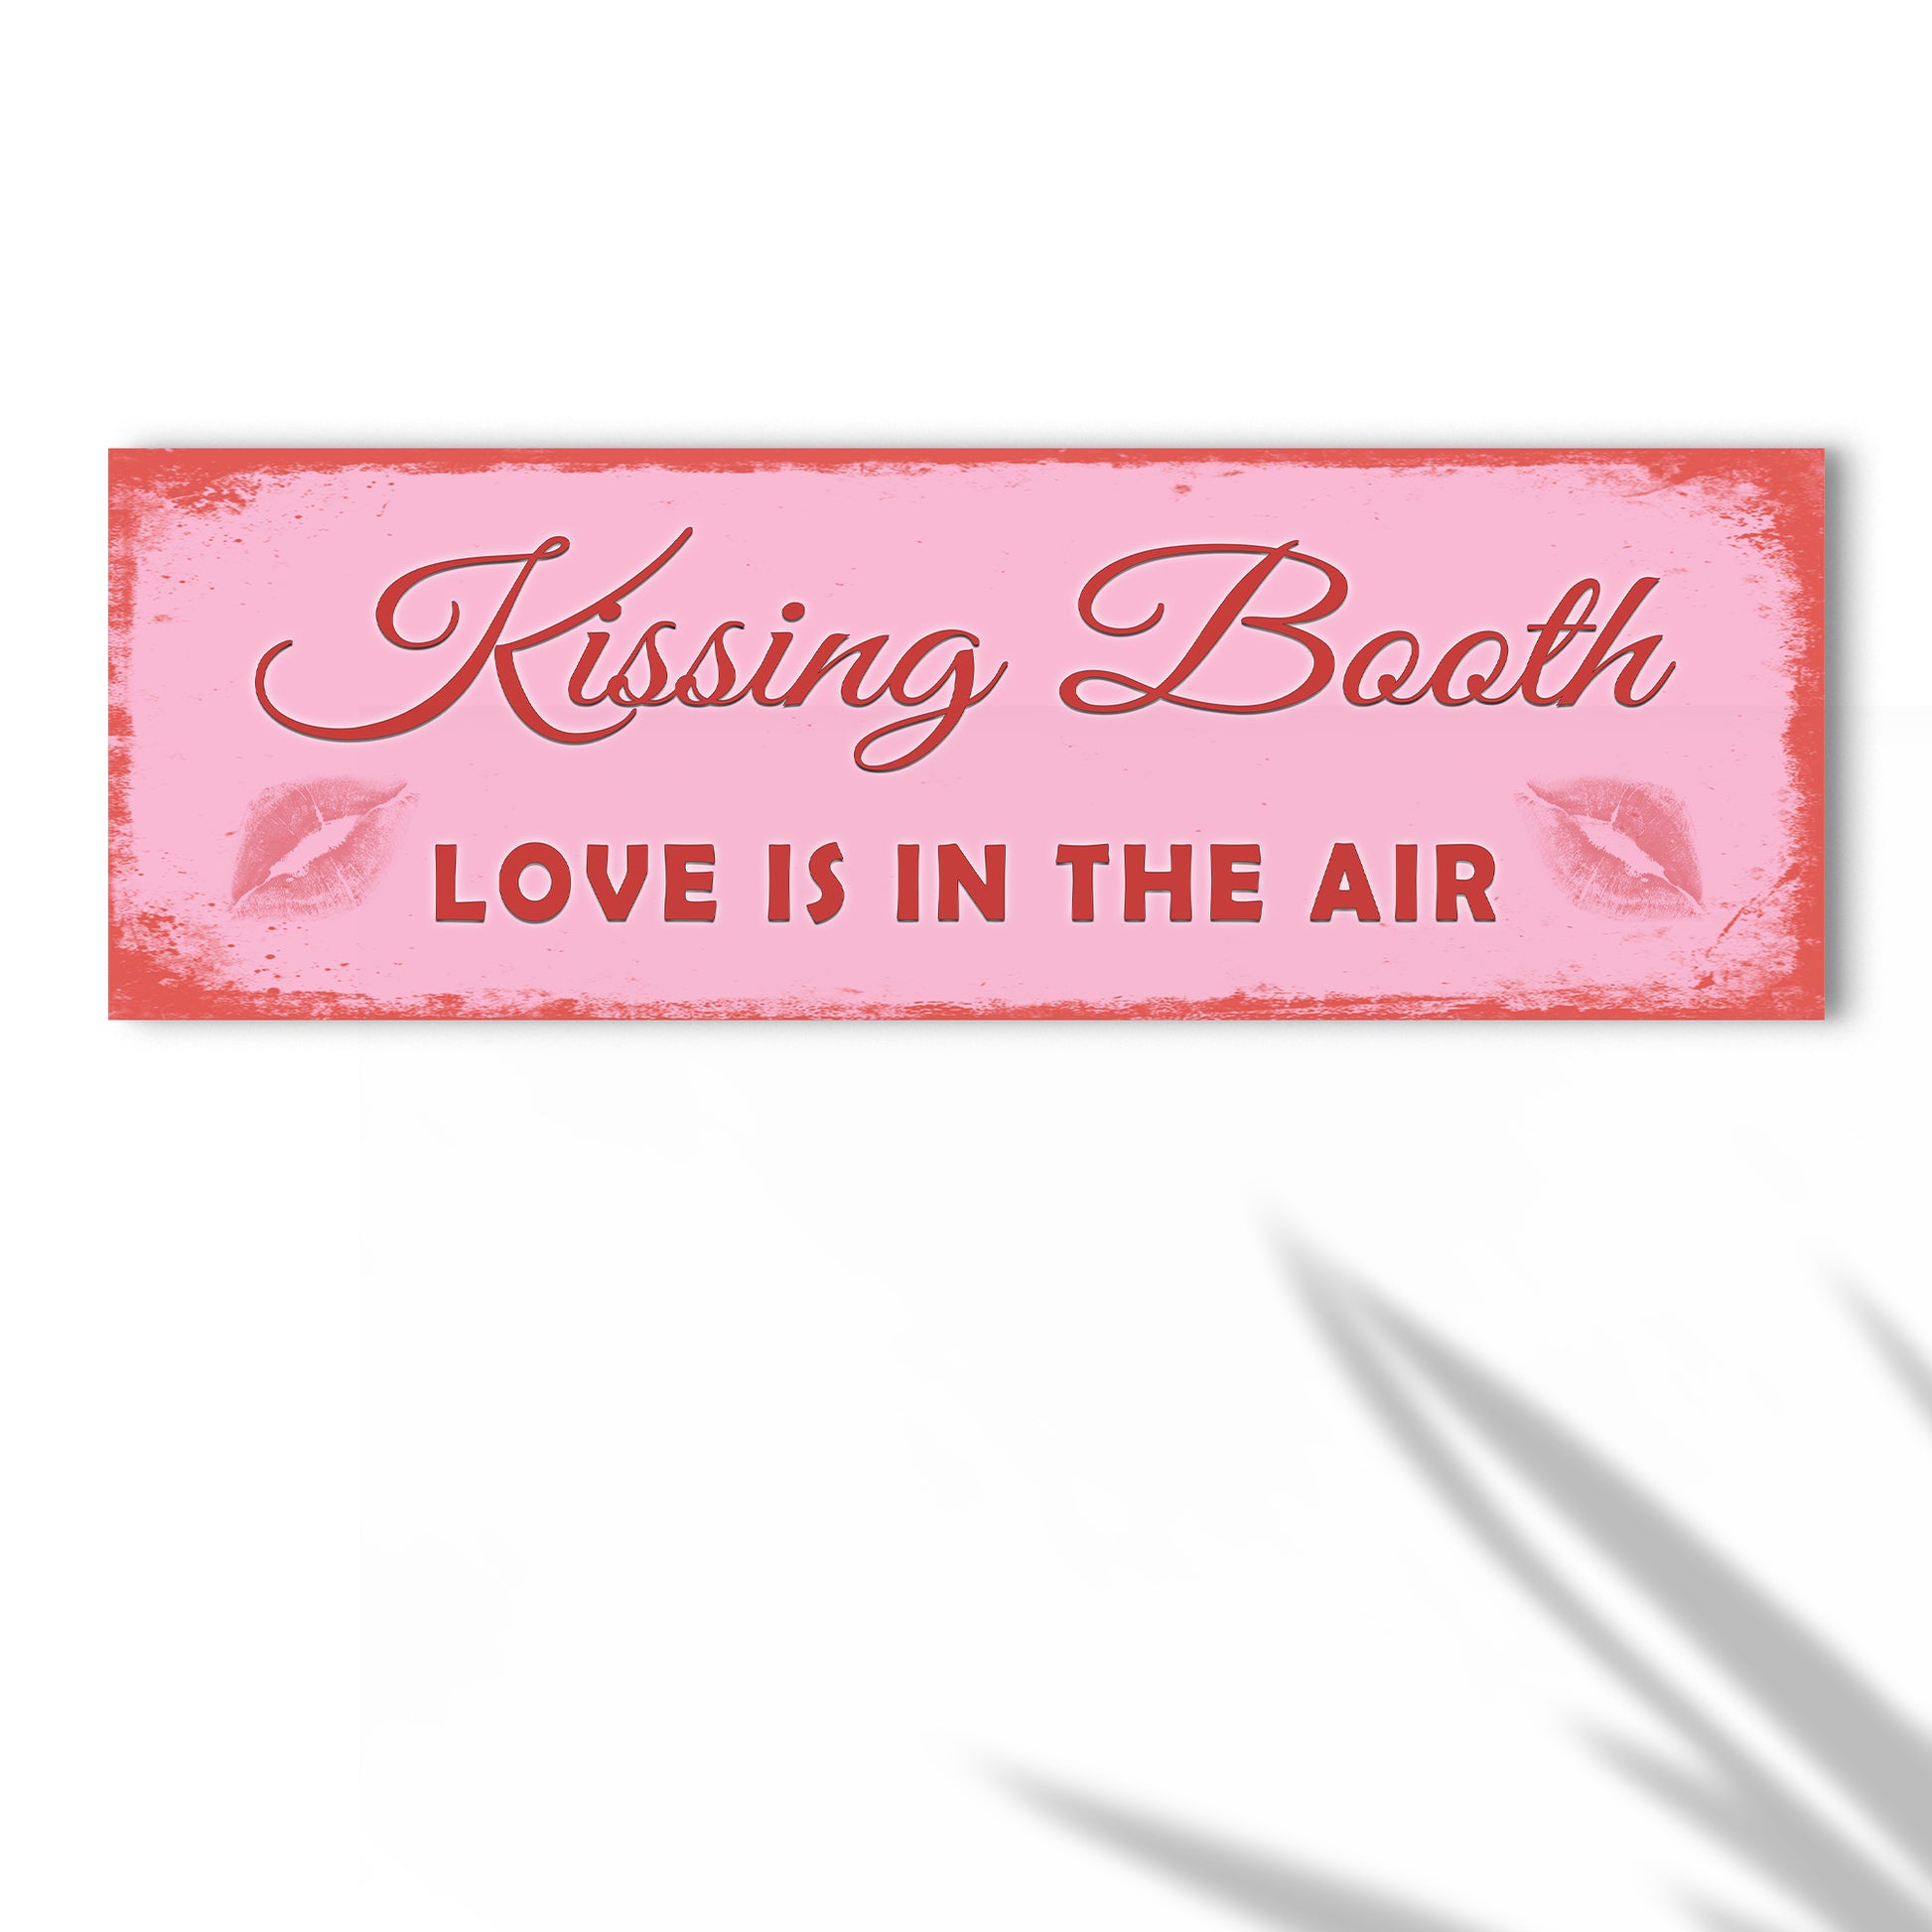 Kissing Booth "Love Is In The Air" Sign Style 1 - Image by Tailored Canvases